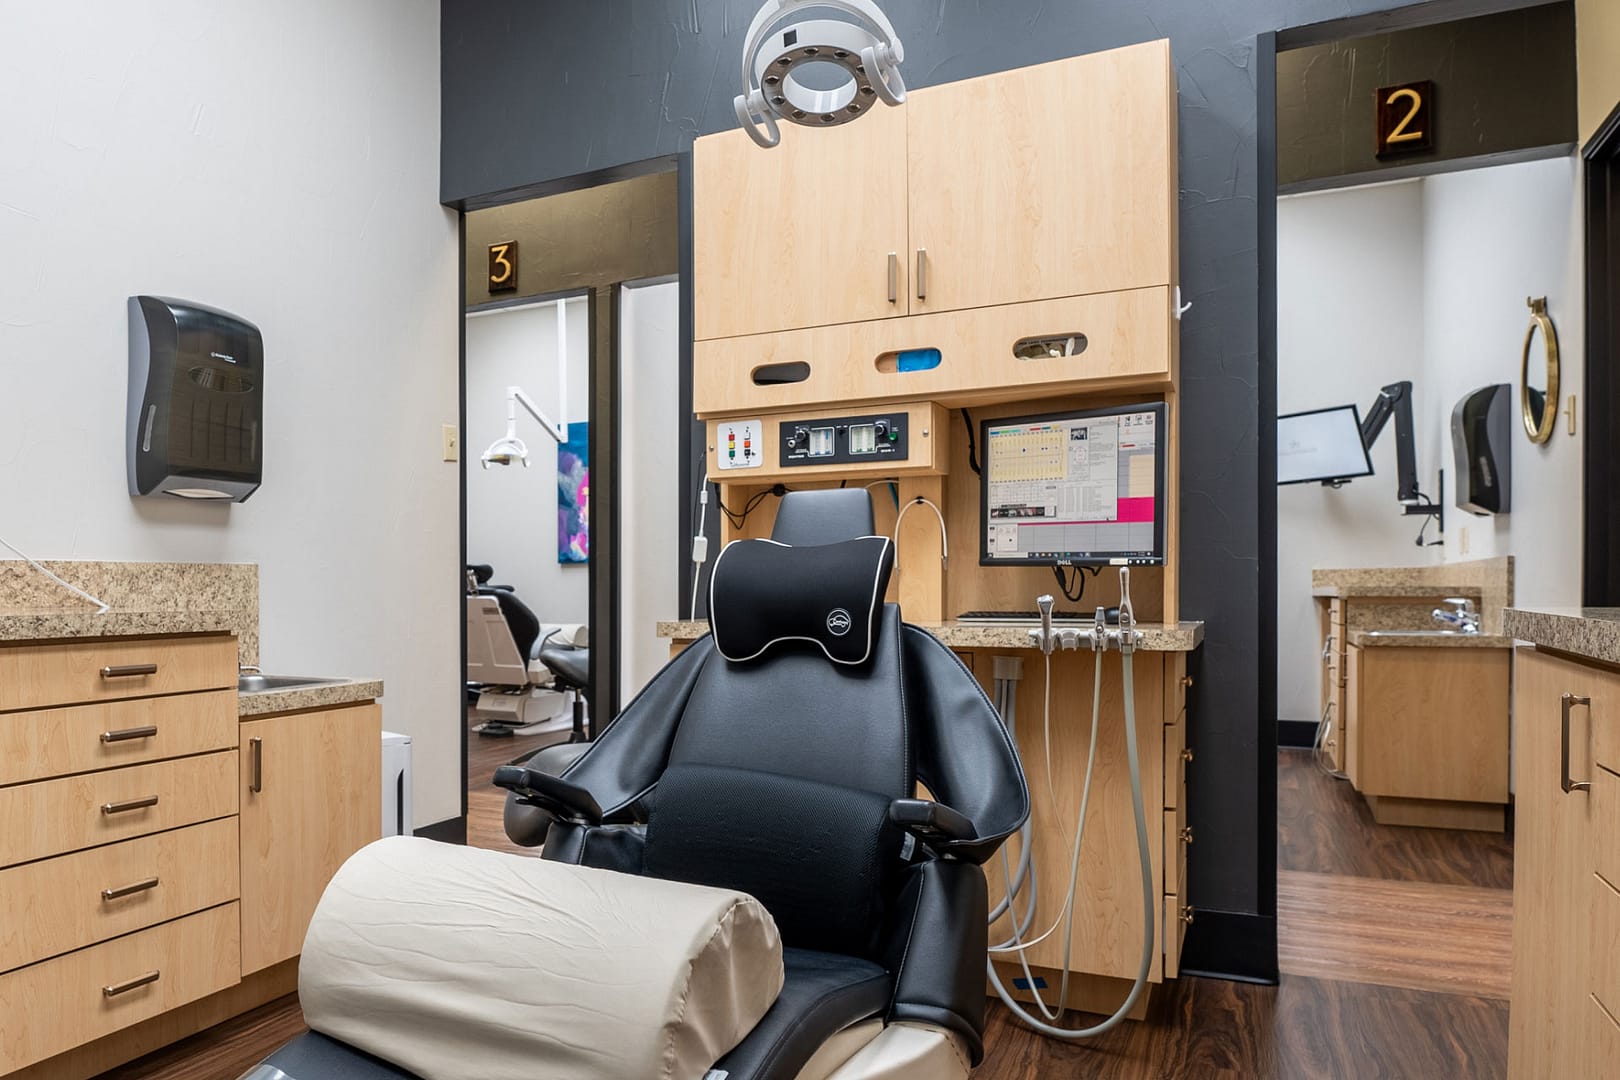 exam room with dental chair and equipment